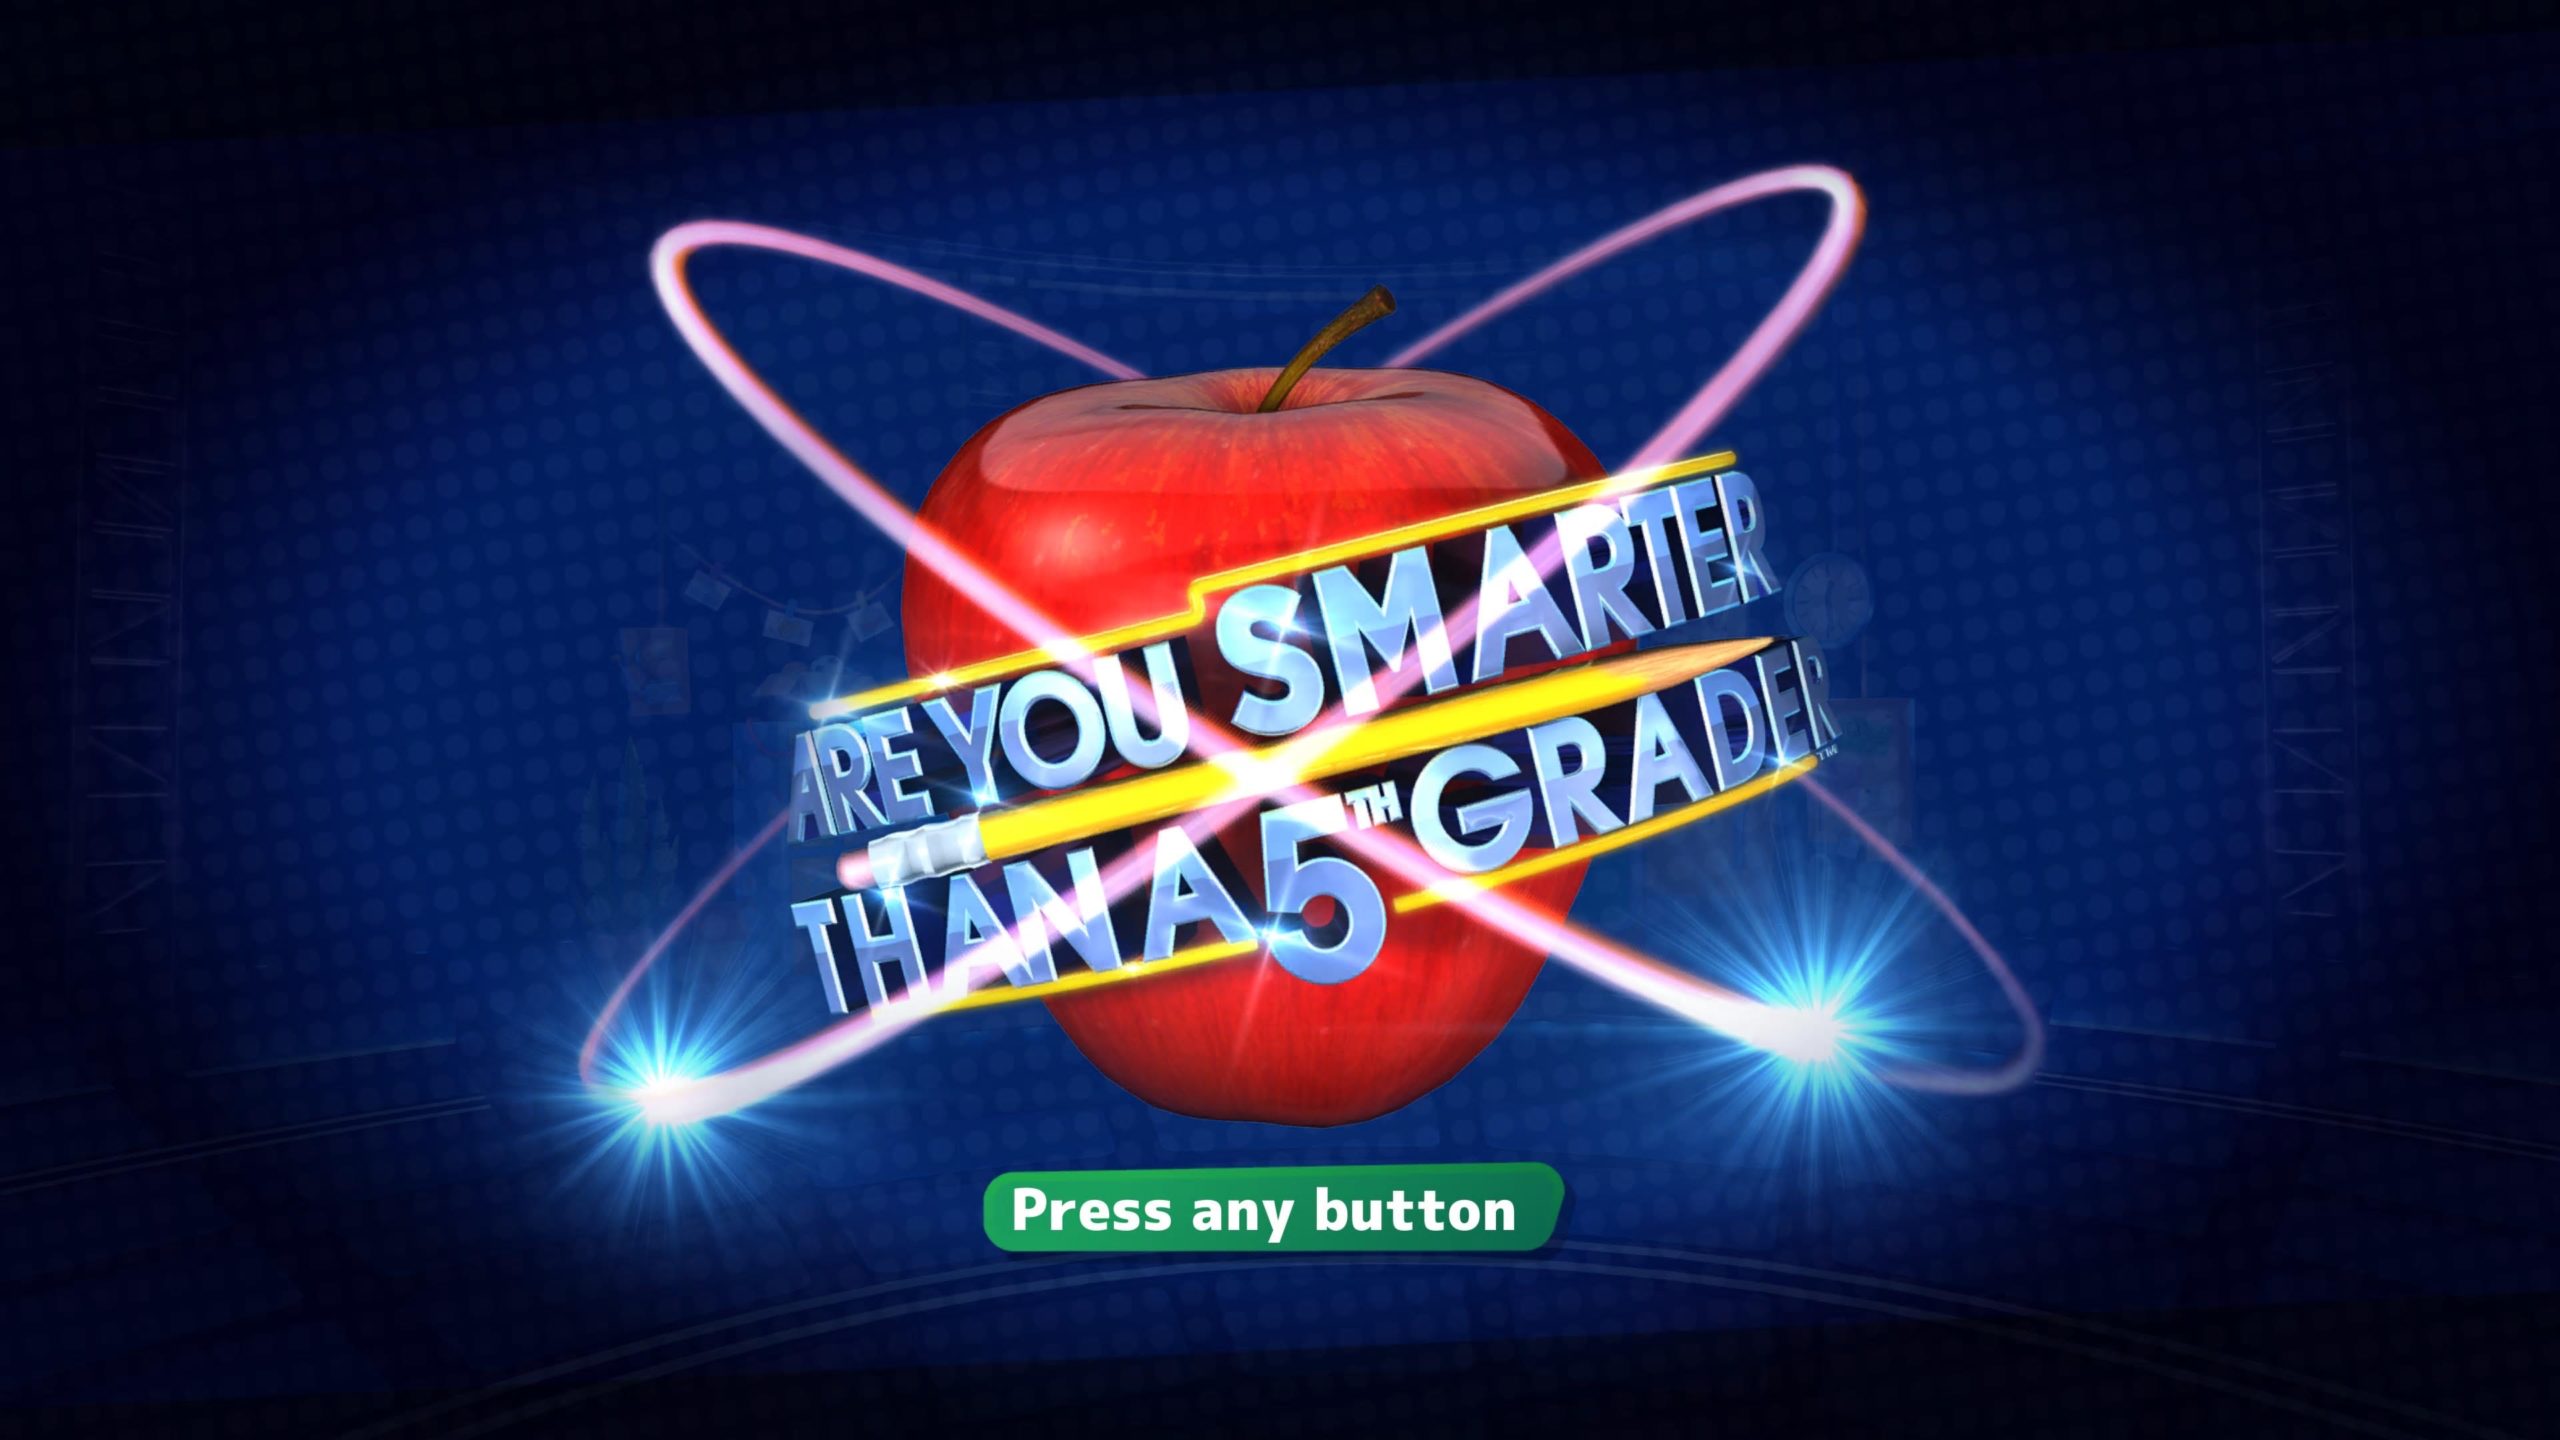 Are you Smarter than a 5th grader game time Xbox 360 обложка. Are you Smarter than a 5th grader? Show.